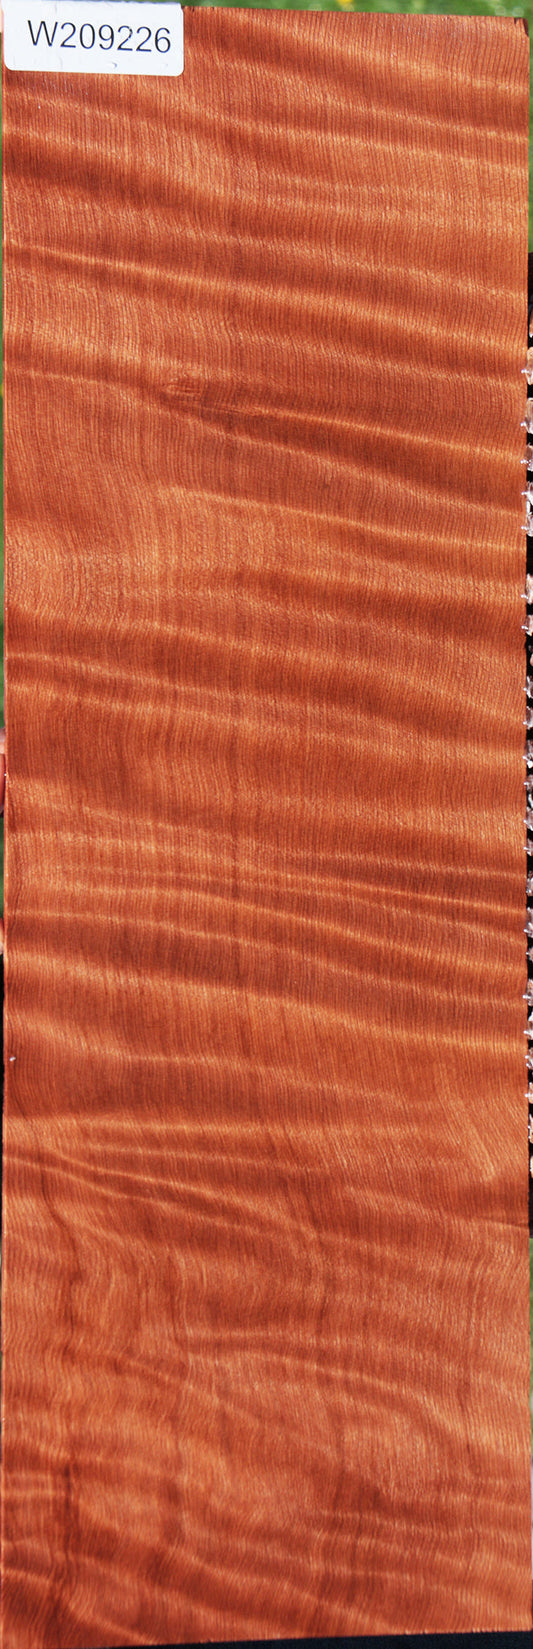 Extra Fancy Curly Redwood Micro Lumber